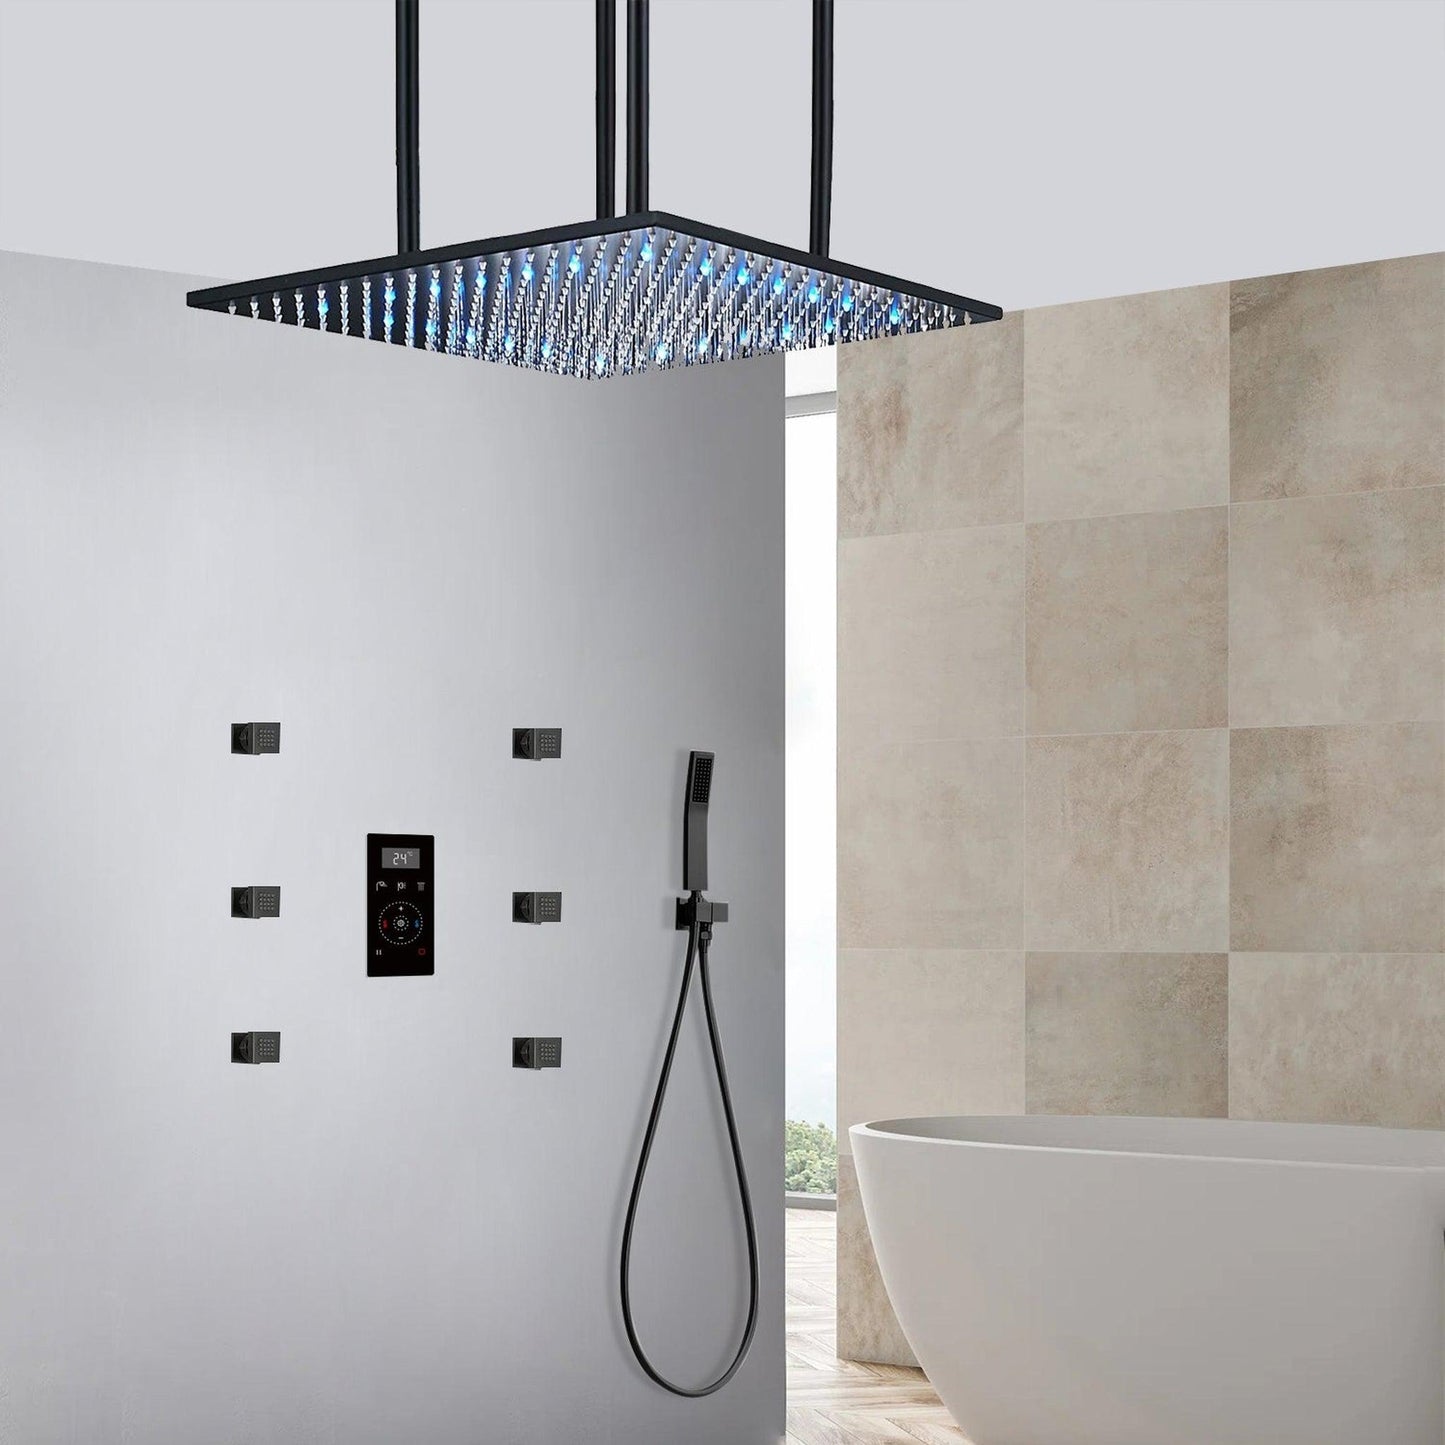 Fontana Reno Matte Black Ceiling Mounted 3-Way Digital Shower System With 6-Jet Body Sprays and Hand Shower